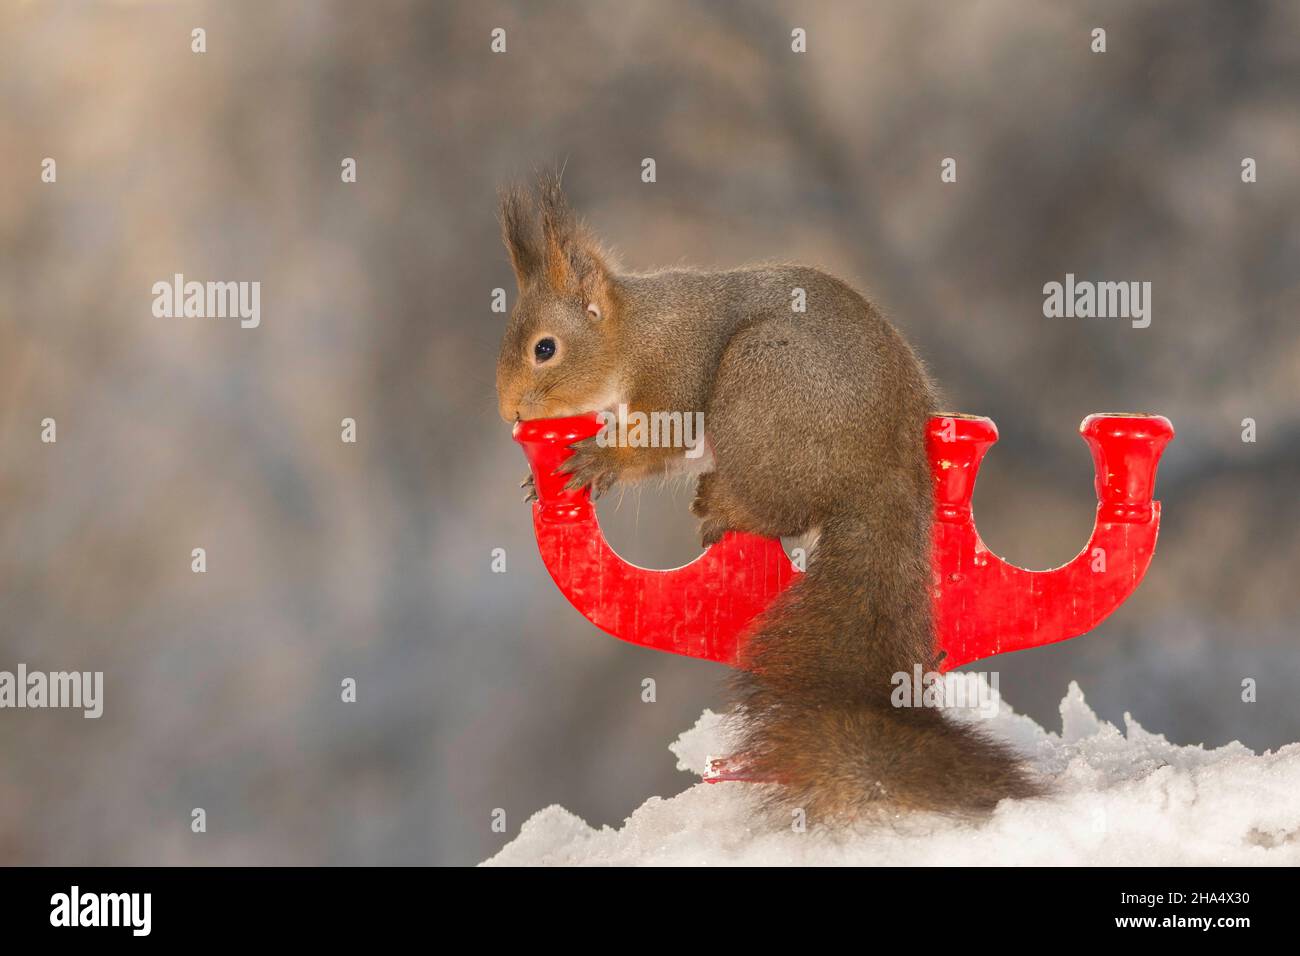 red squirrel standing and holding on to a candleholder standing on snow Stock Photo